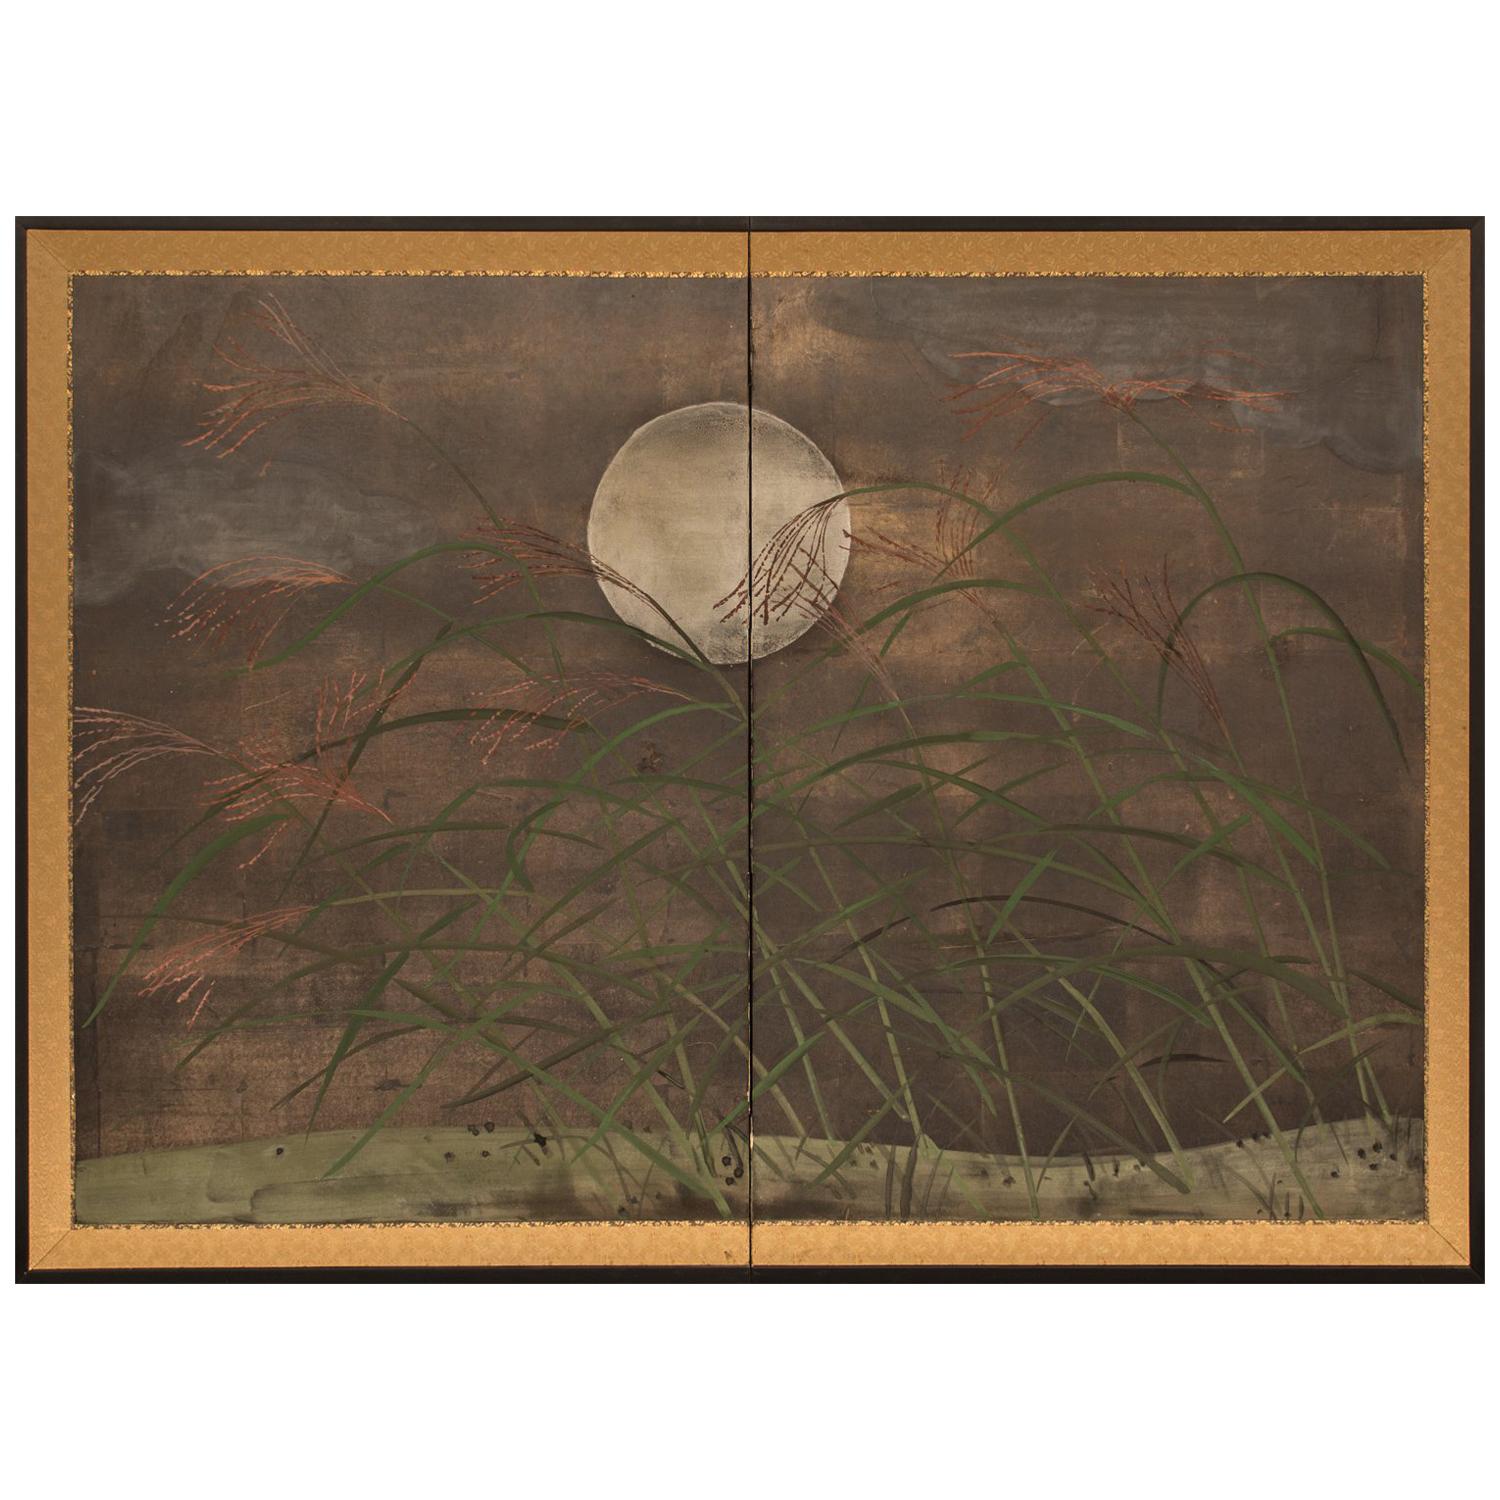 Japanese Two Panel Screen Moon and Wild Grasses on Oxidized Silver with Clouds